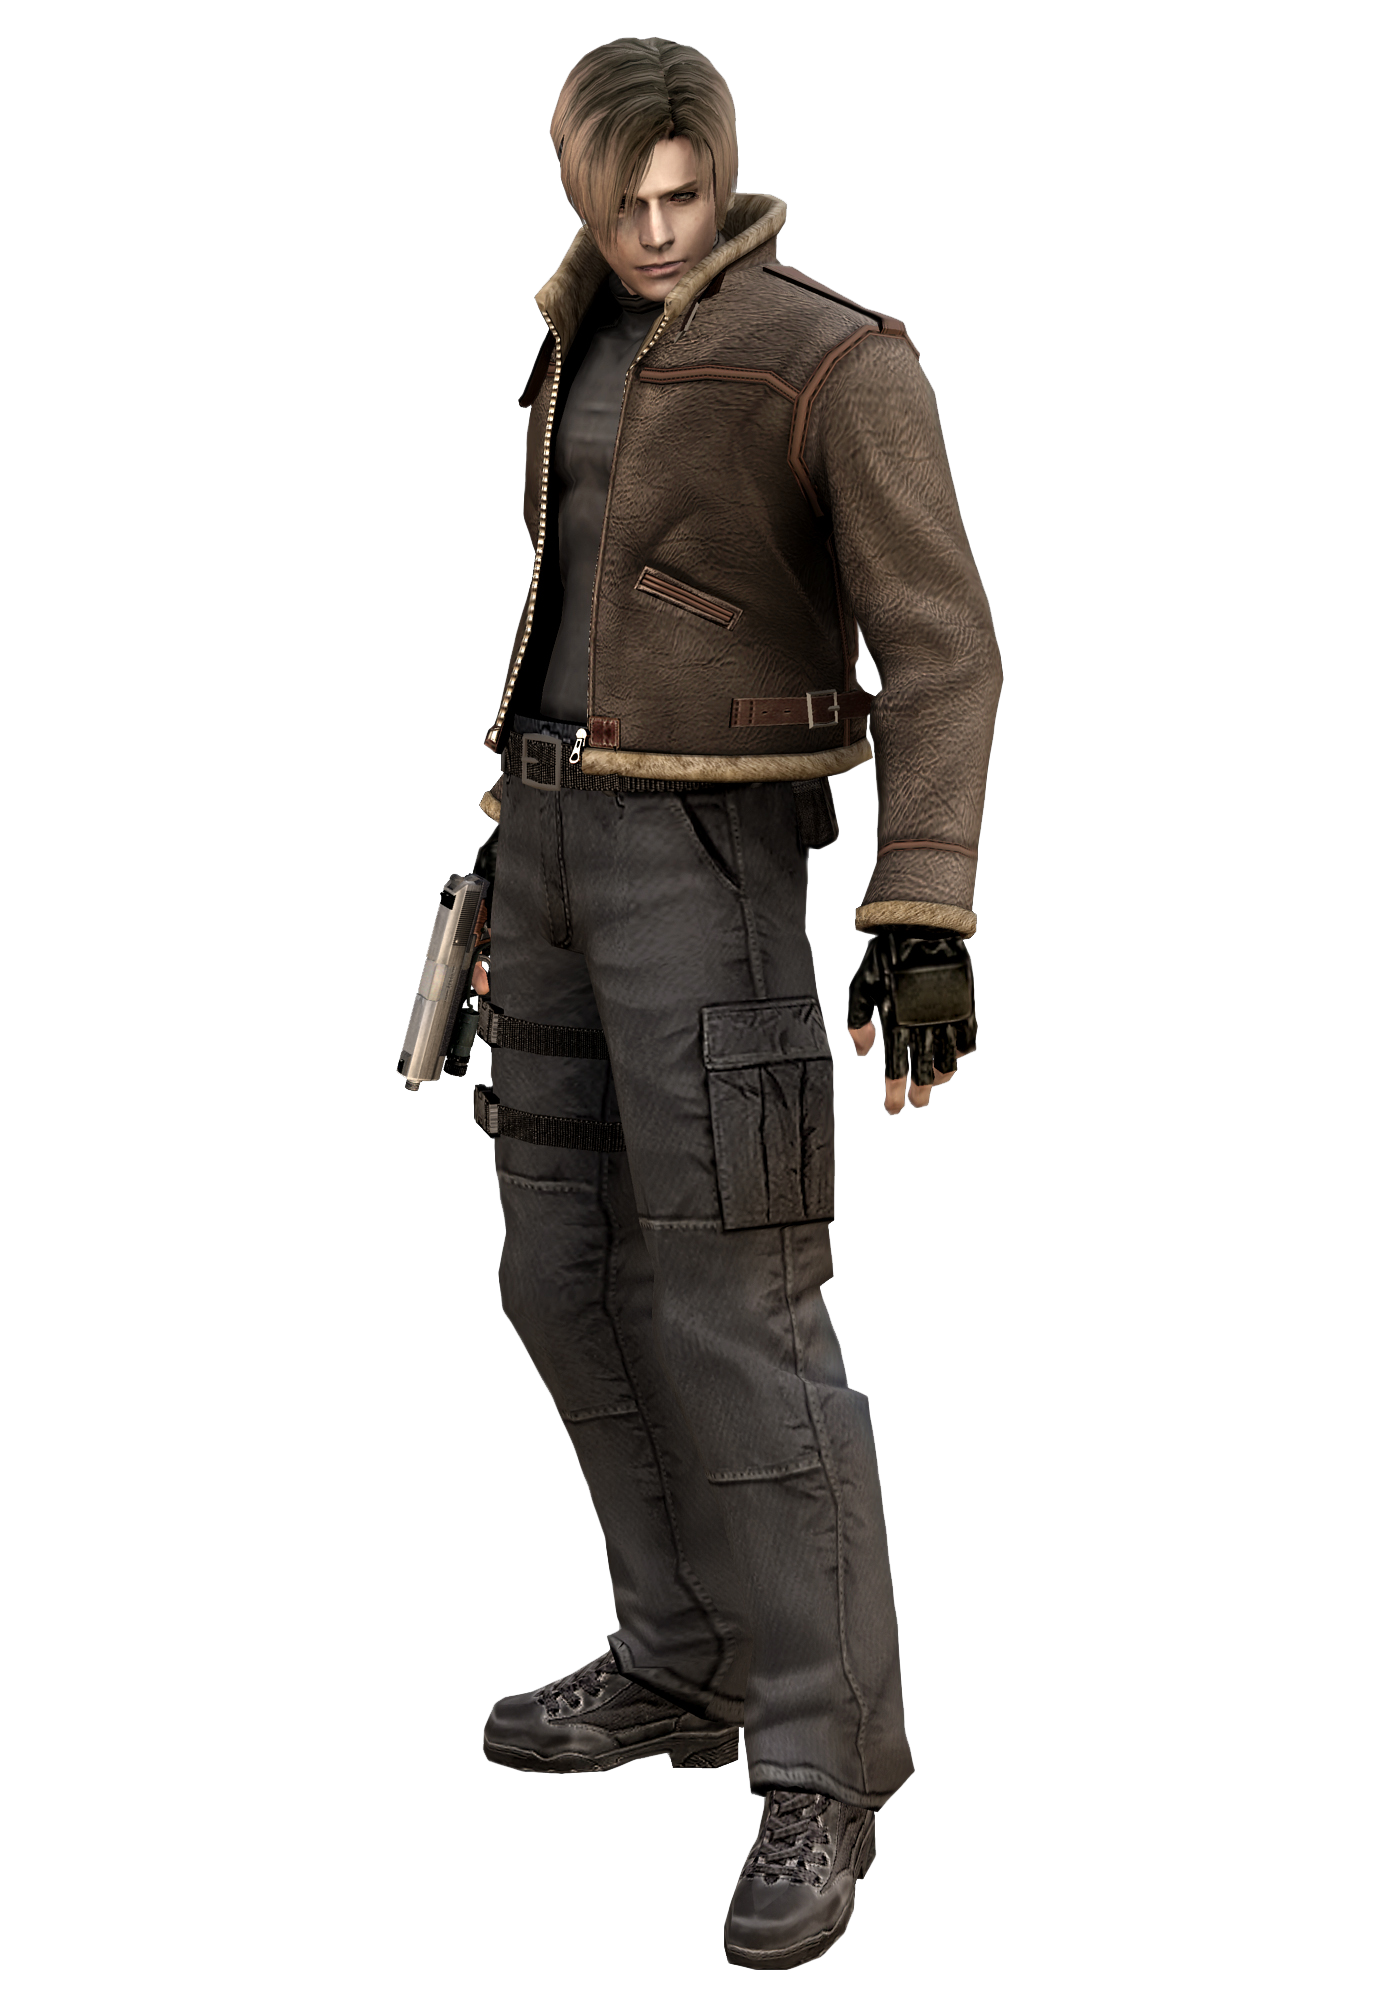 Resident_Evil_4_-_Leon_Scott_Kennedy_with_jacket_render.png